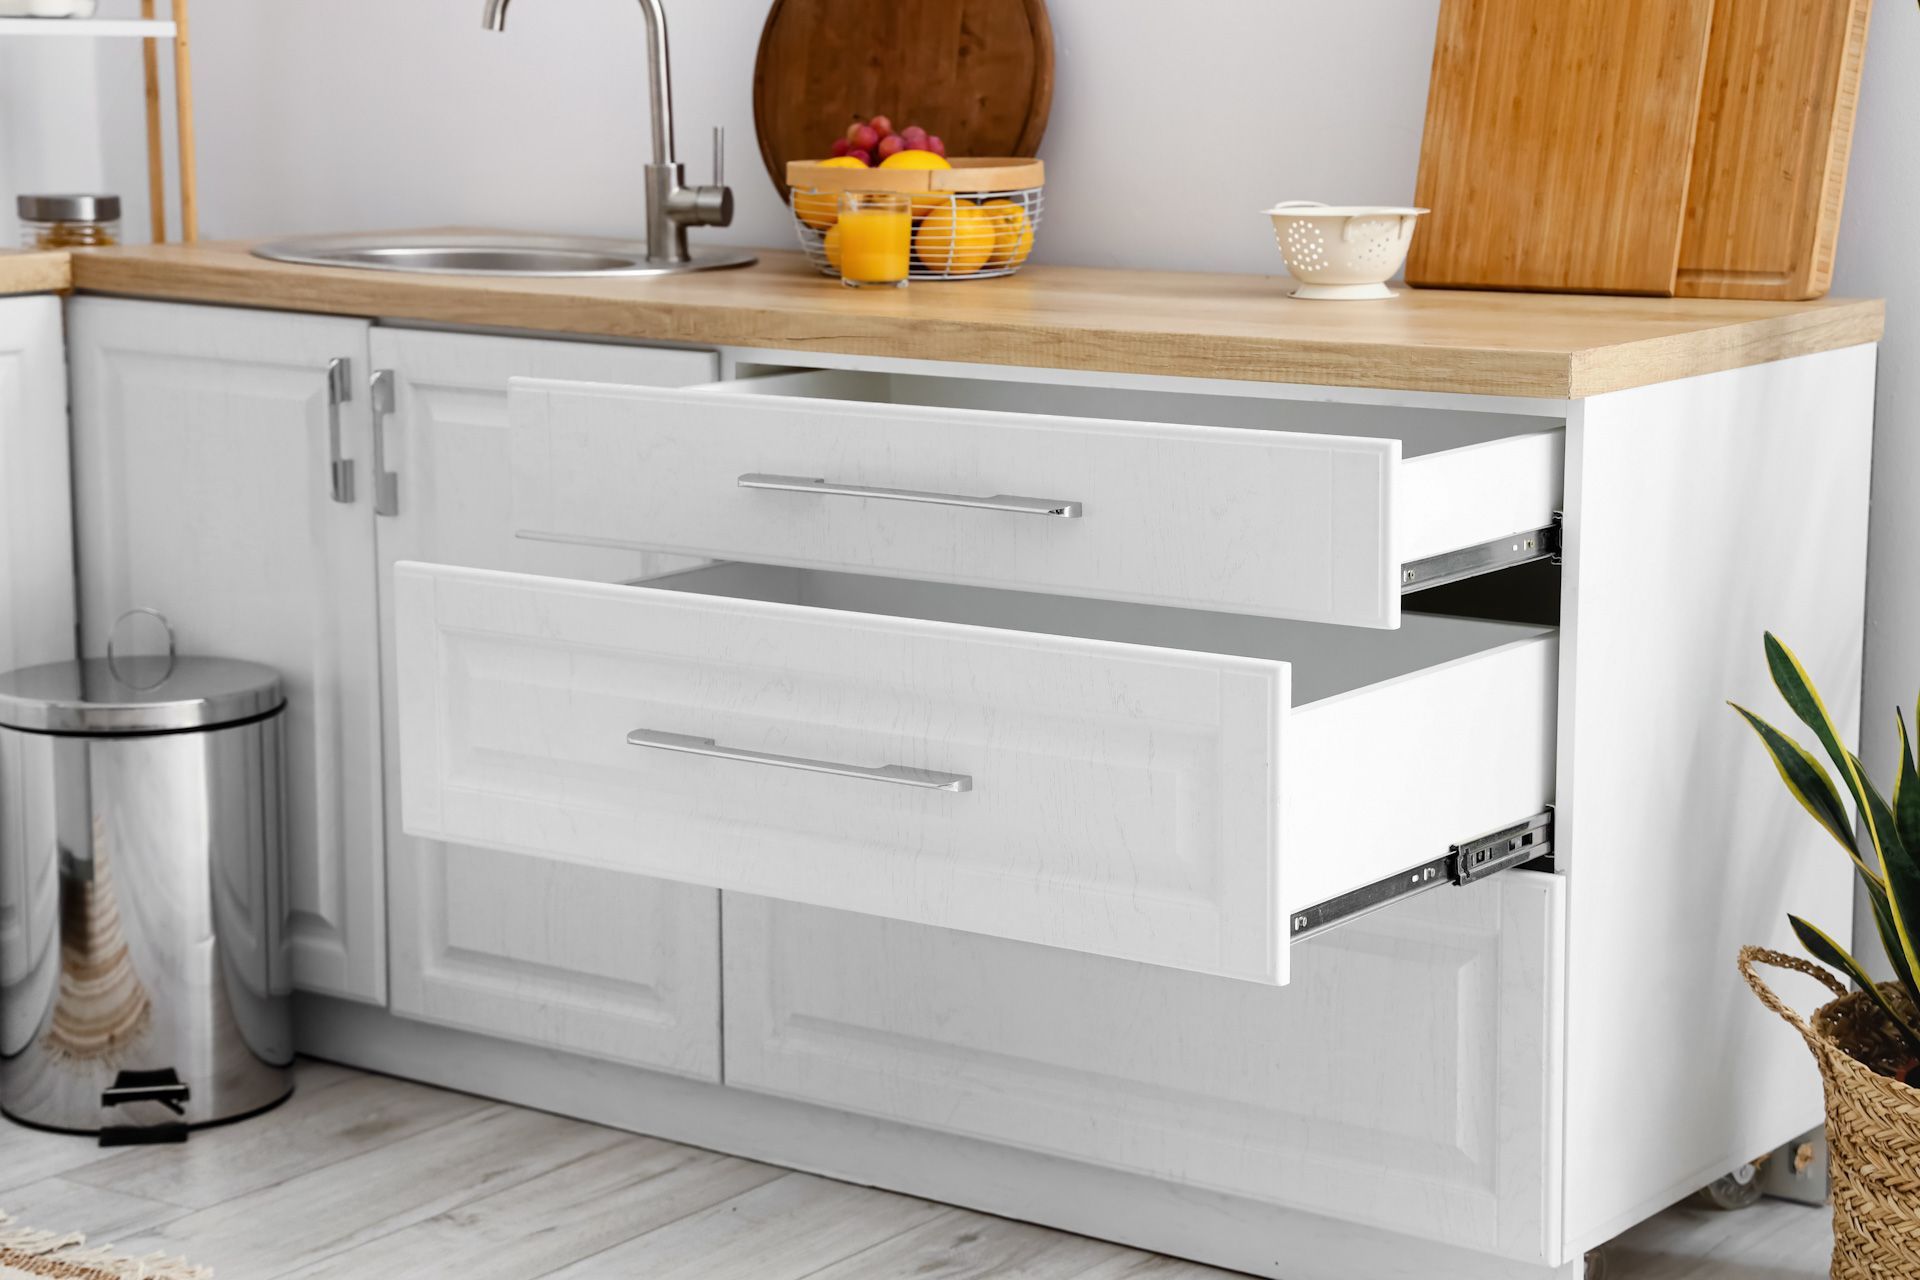 A kitchen with white cabinets, a sink, a trash can, and an open drawer.